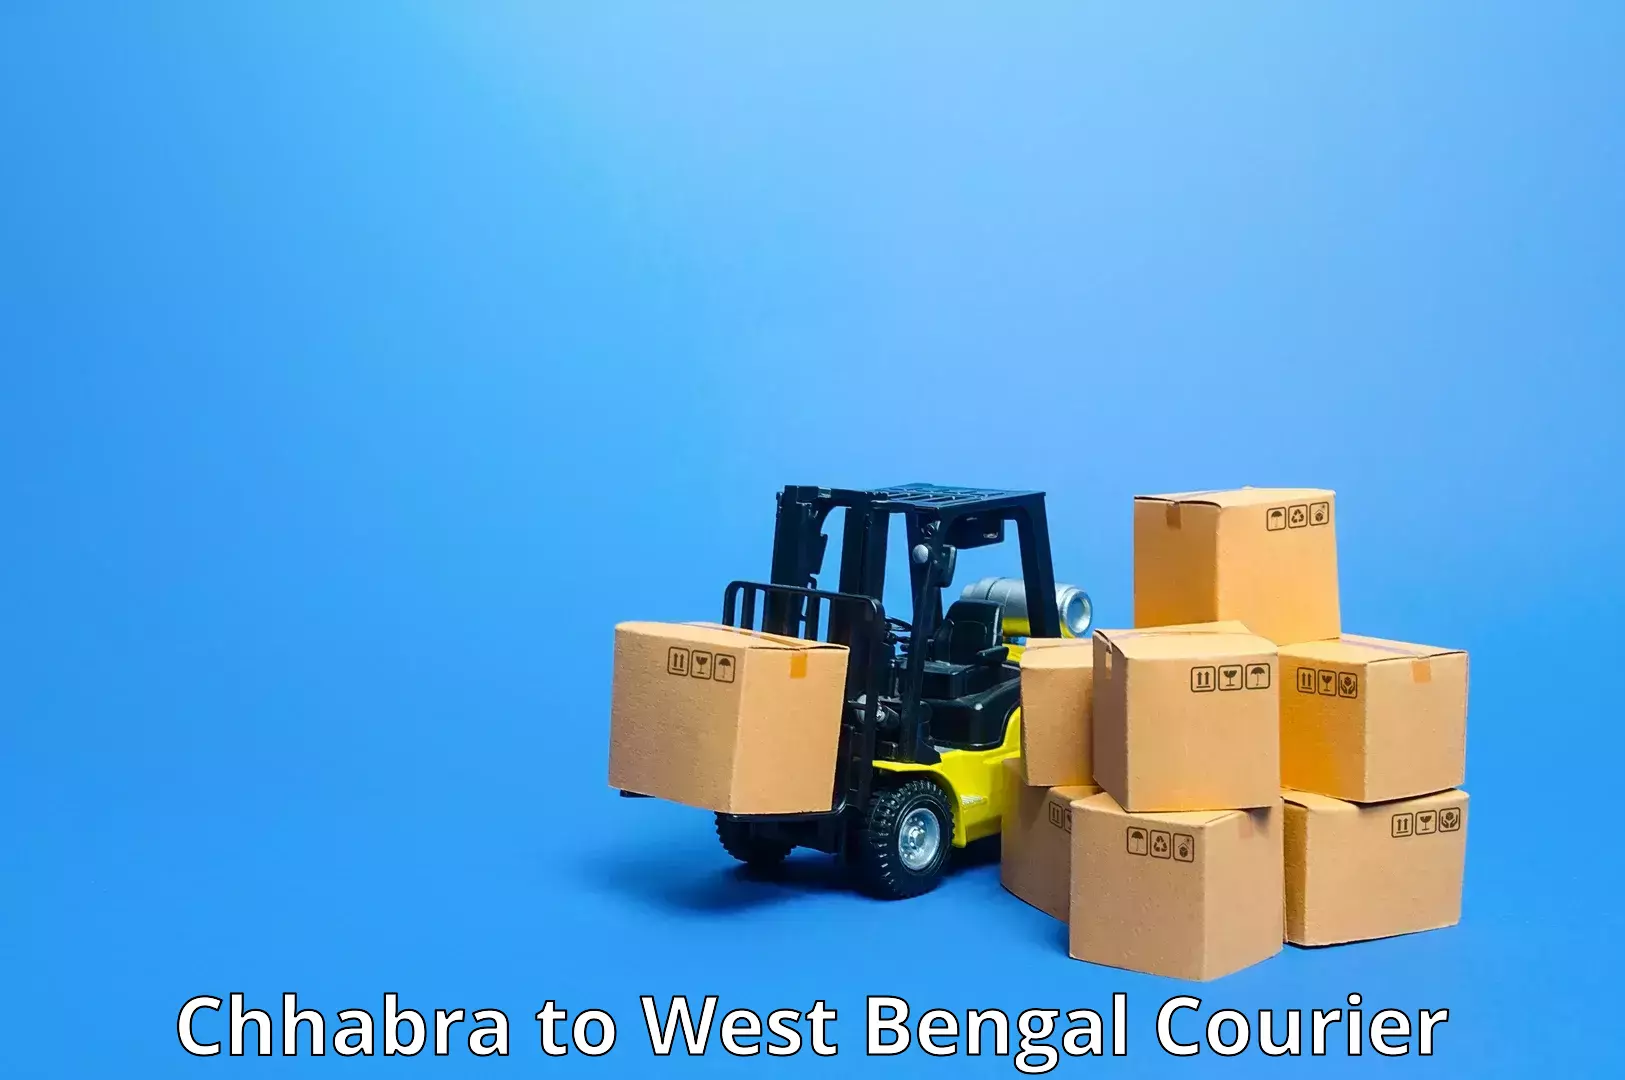 Sustainable shipping practices Chhabra to Chhatna